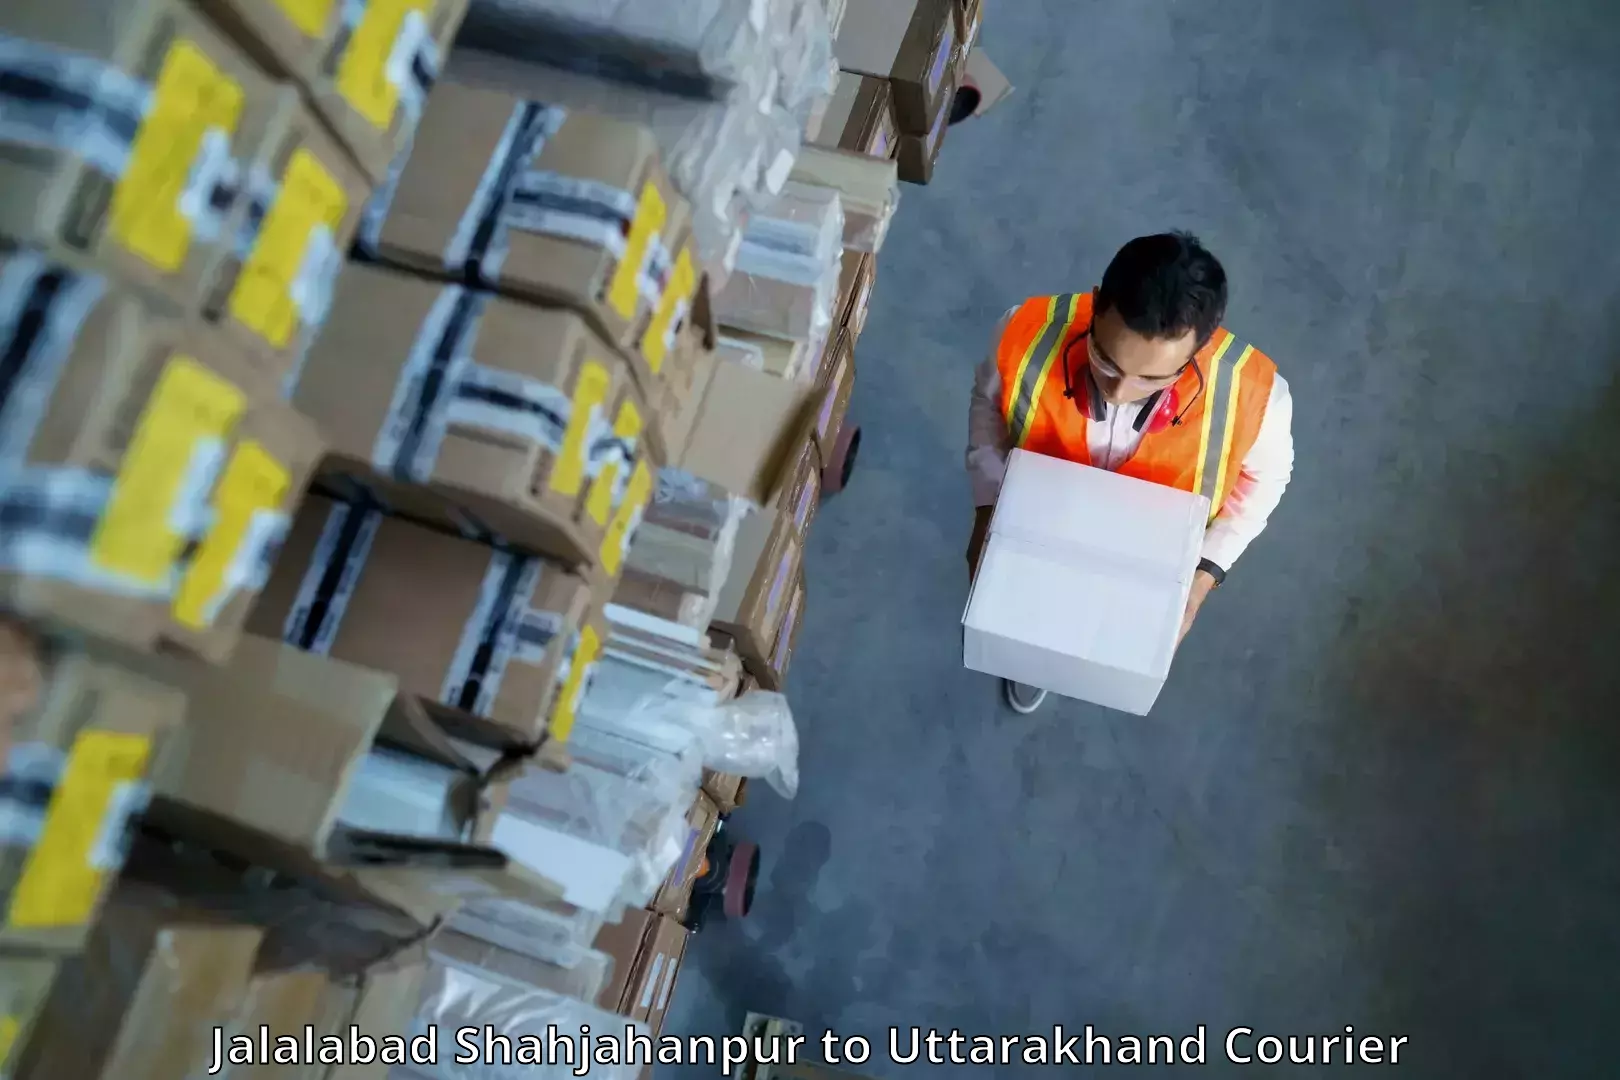 Nationwide courier service Jalalabad Shahjahanpur to Rudrapur